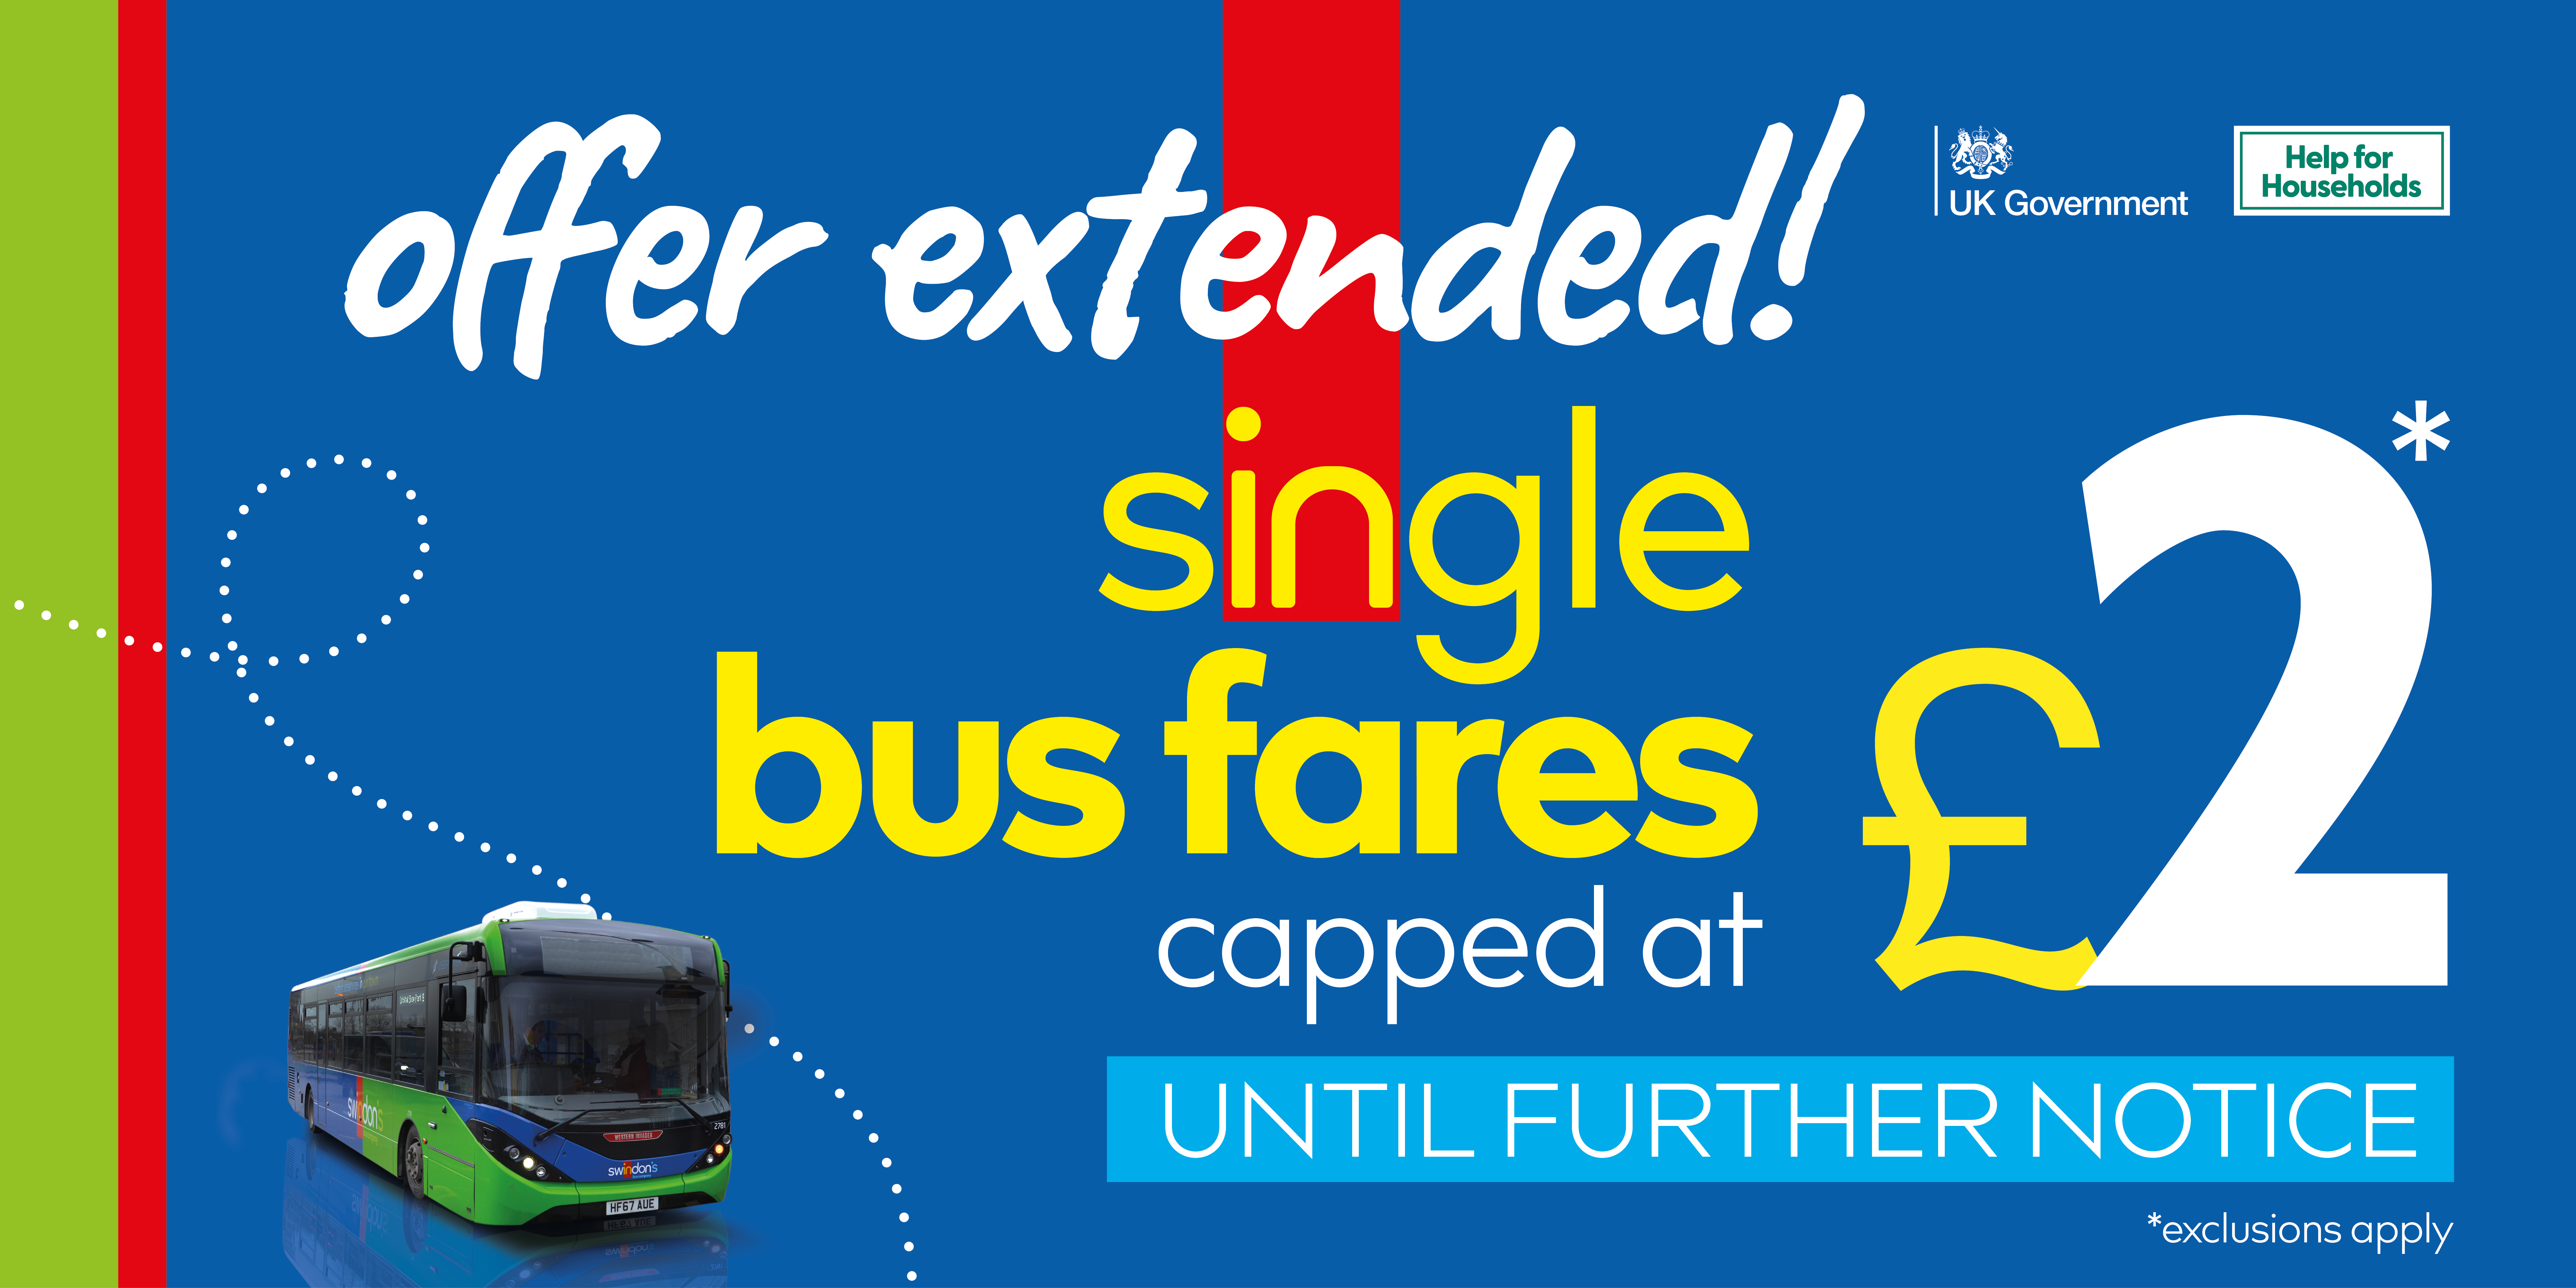 £2 single journey initiative extended once again!